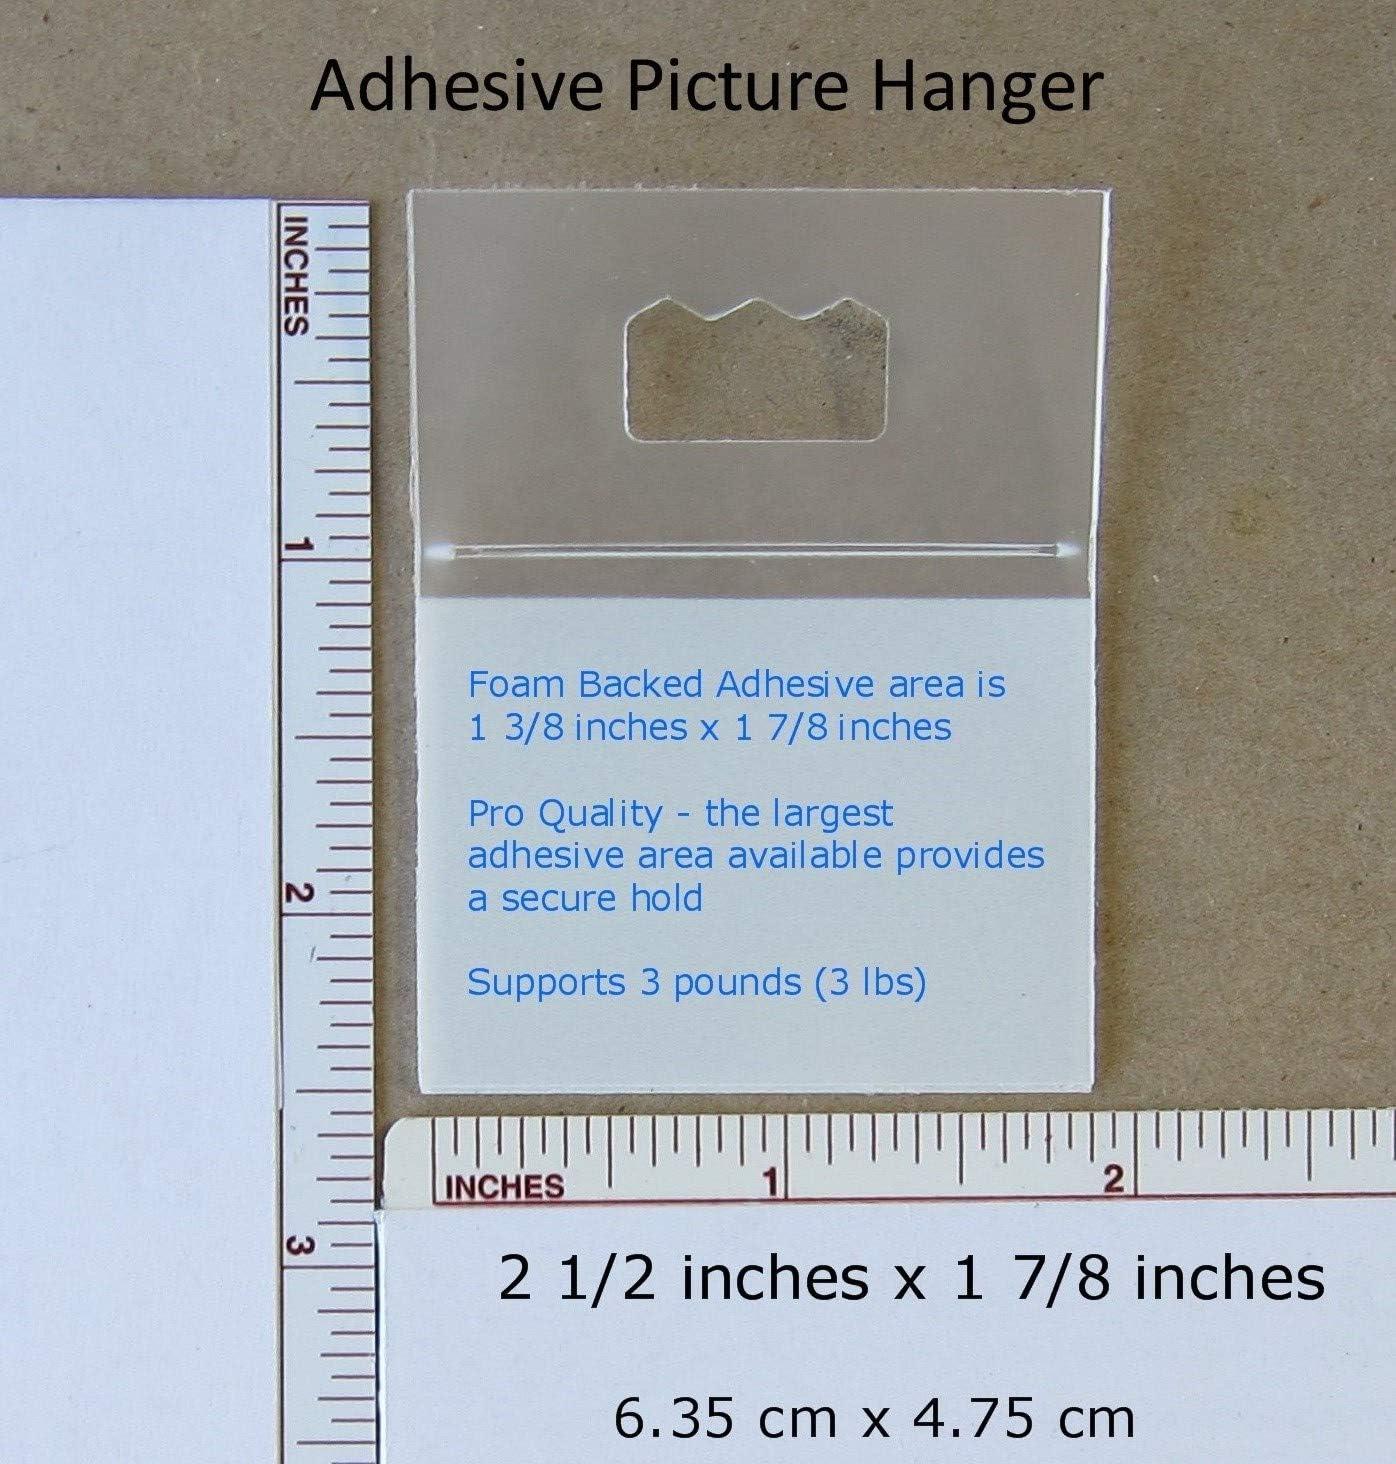 Adhesive Picture Hanger